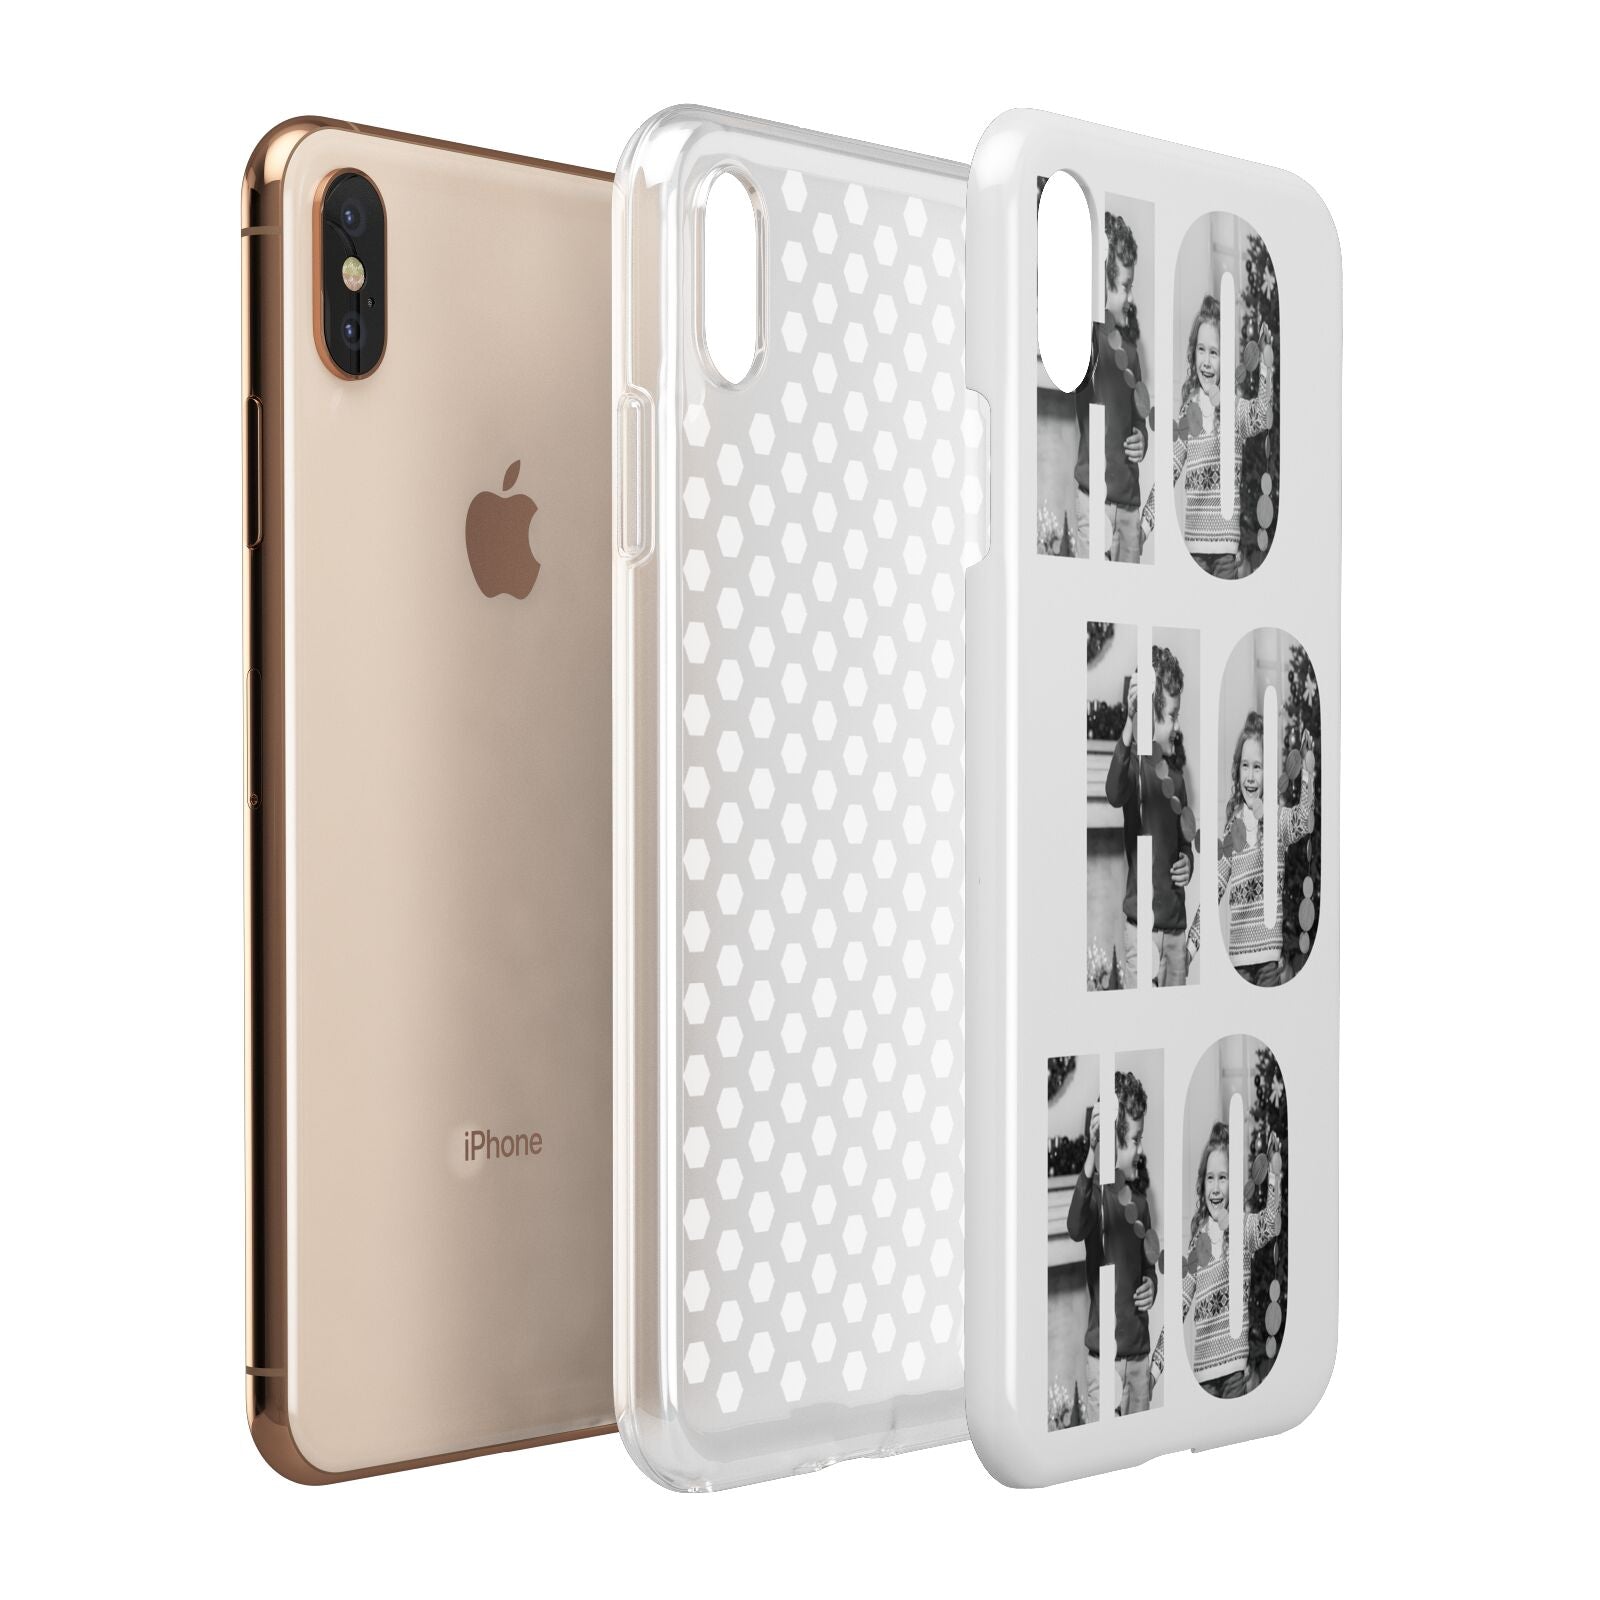 Ho Ho Ho Photo Upload Christmas Apple iPhone Xs Max 3D Tough Case Expanded View